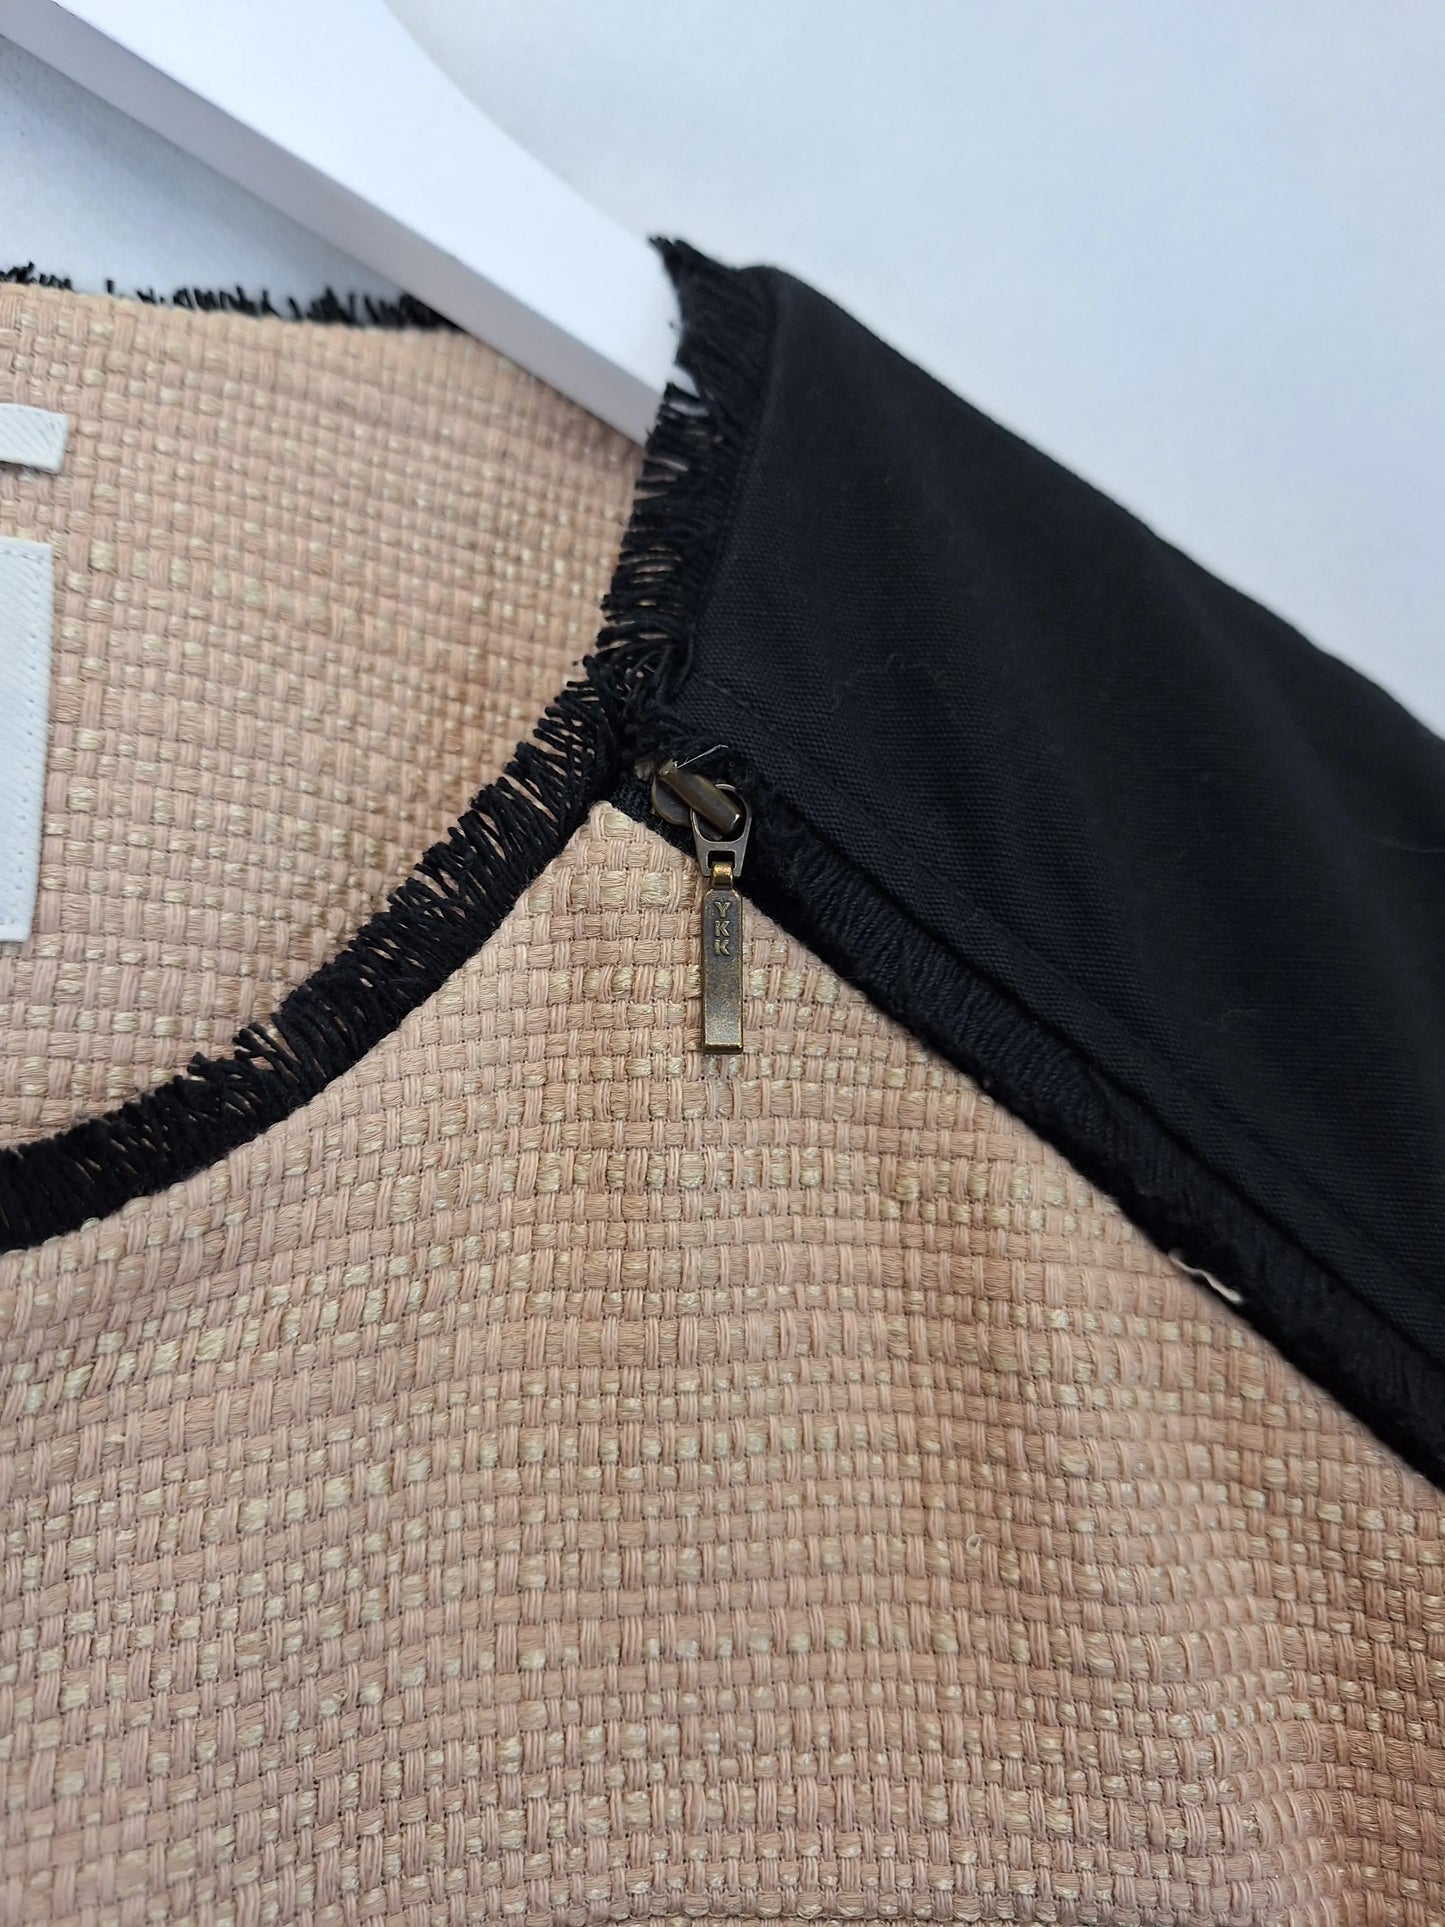 Country Road Boucle Italian Fabric Timeless Blazer Size 14 by SwapUp-Online Second Hand Store-Online Thrift Store